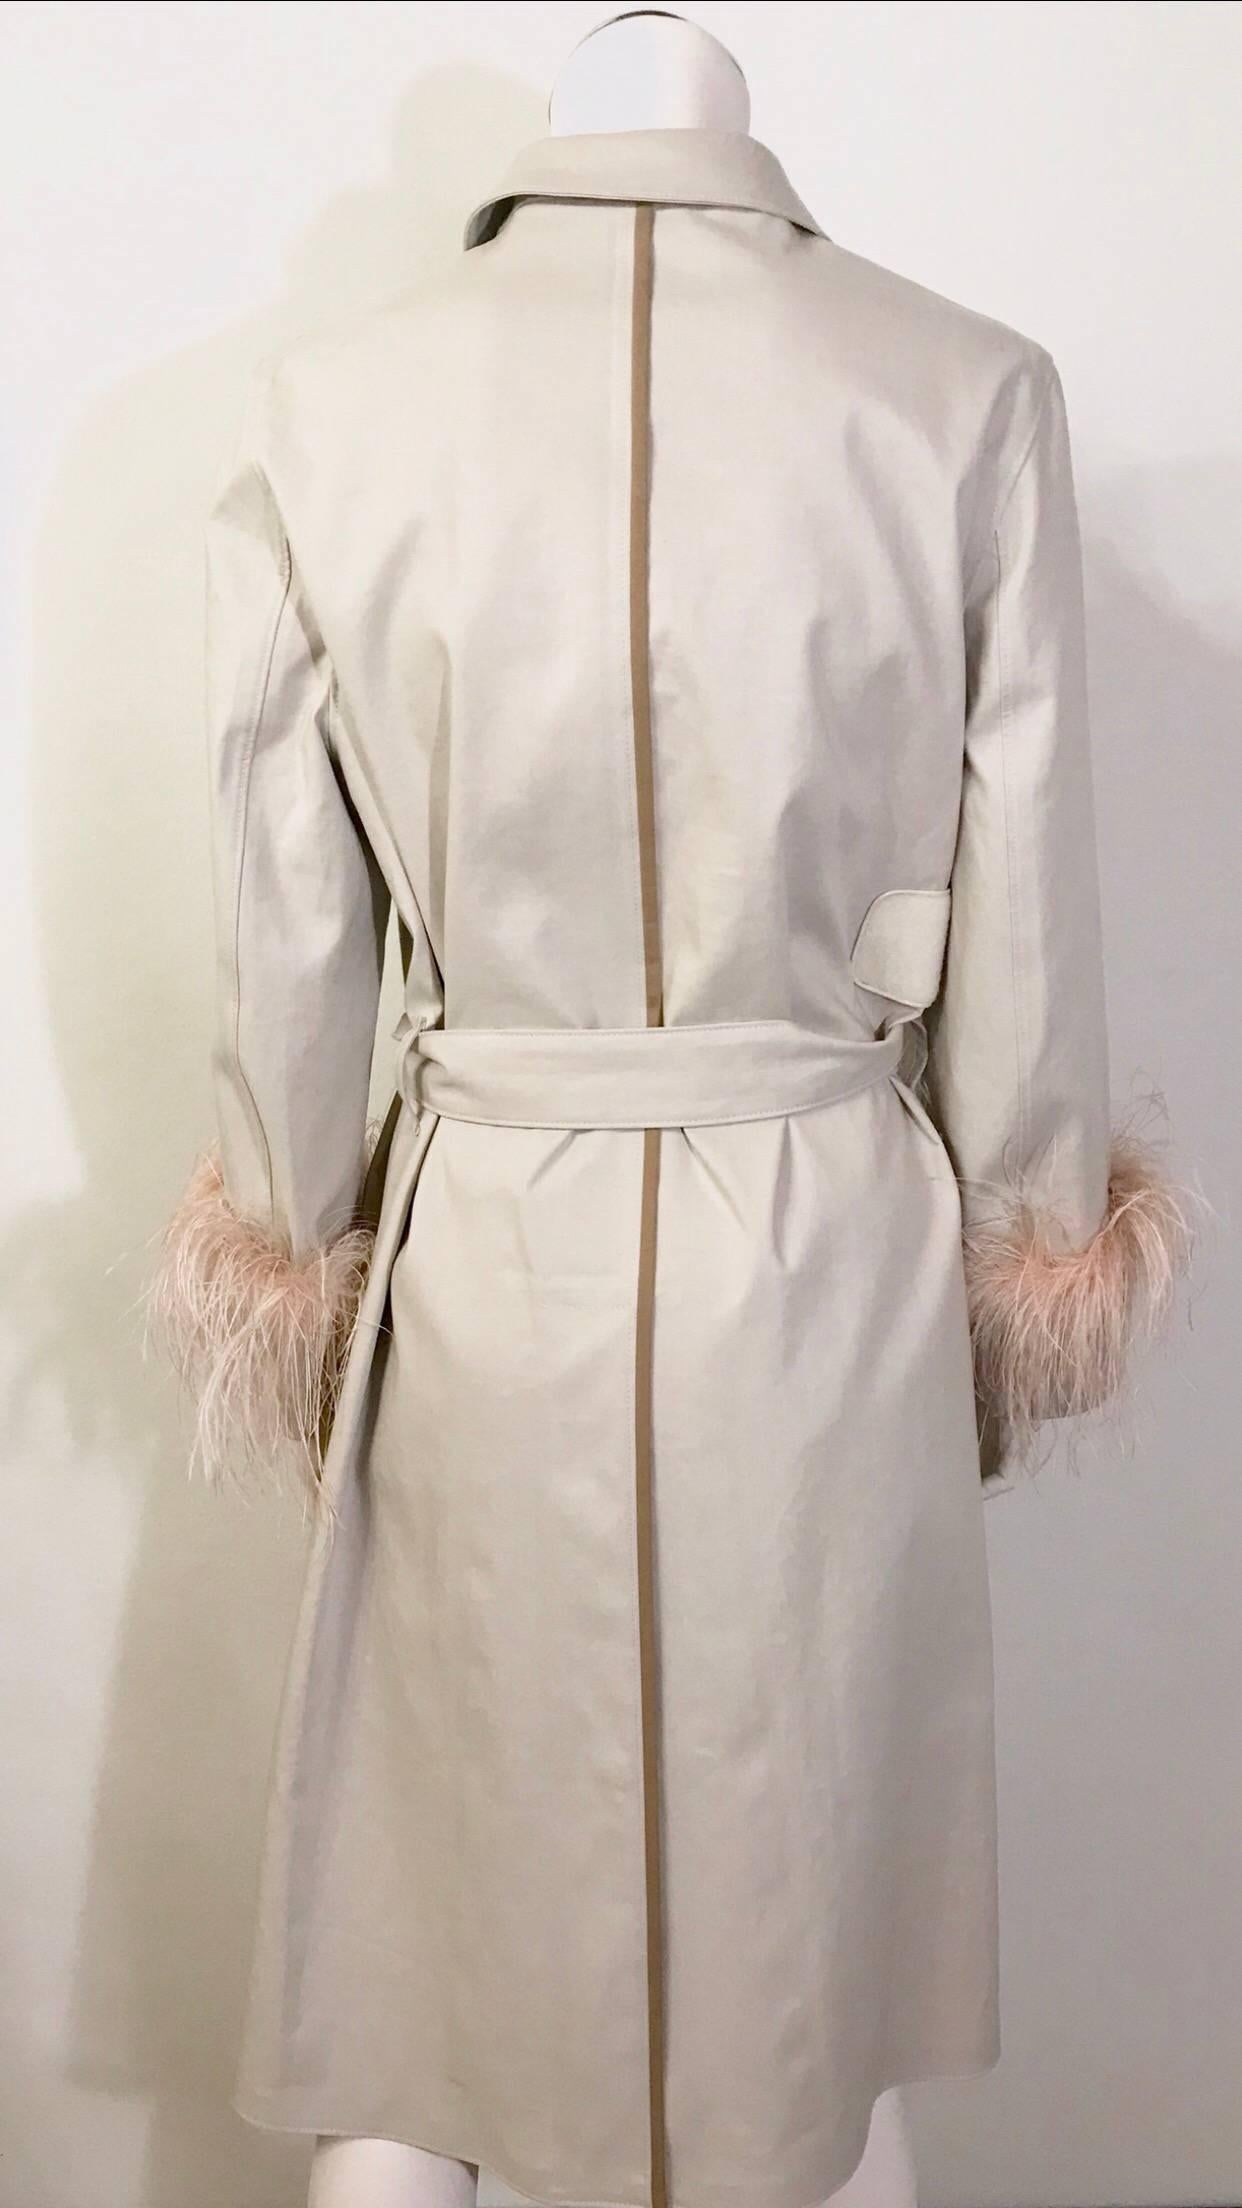 Prada  Overcoat in cotton with Sleeves in Ostrich Fur couture 2017 For Sale 1